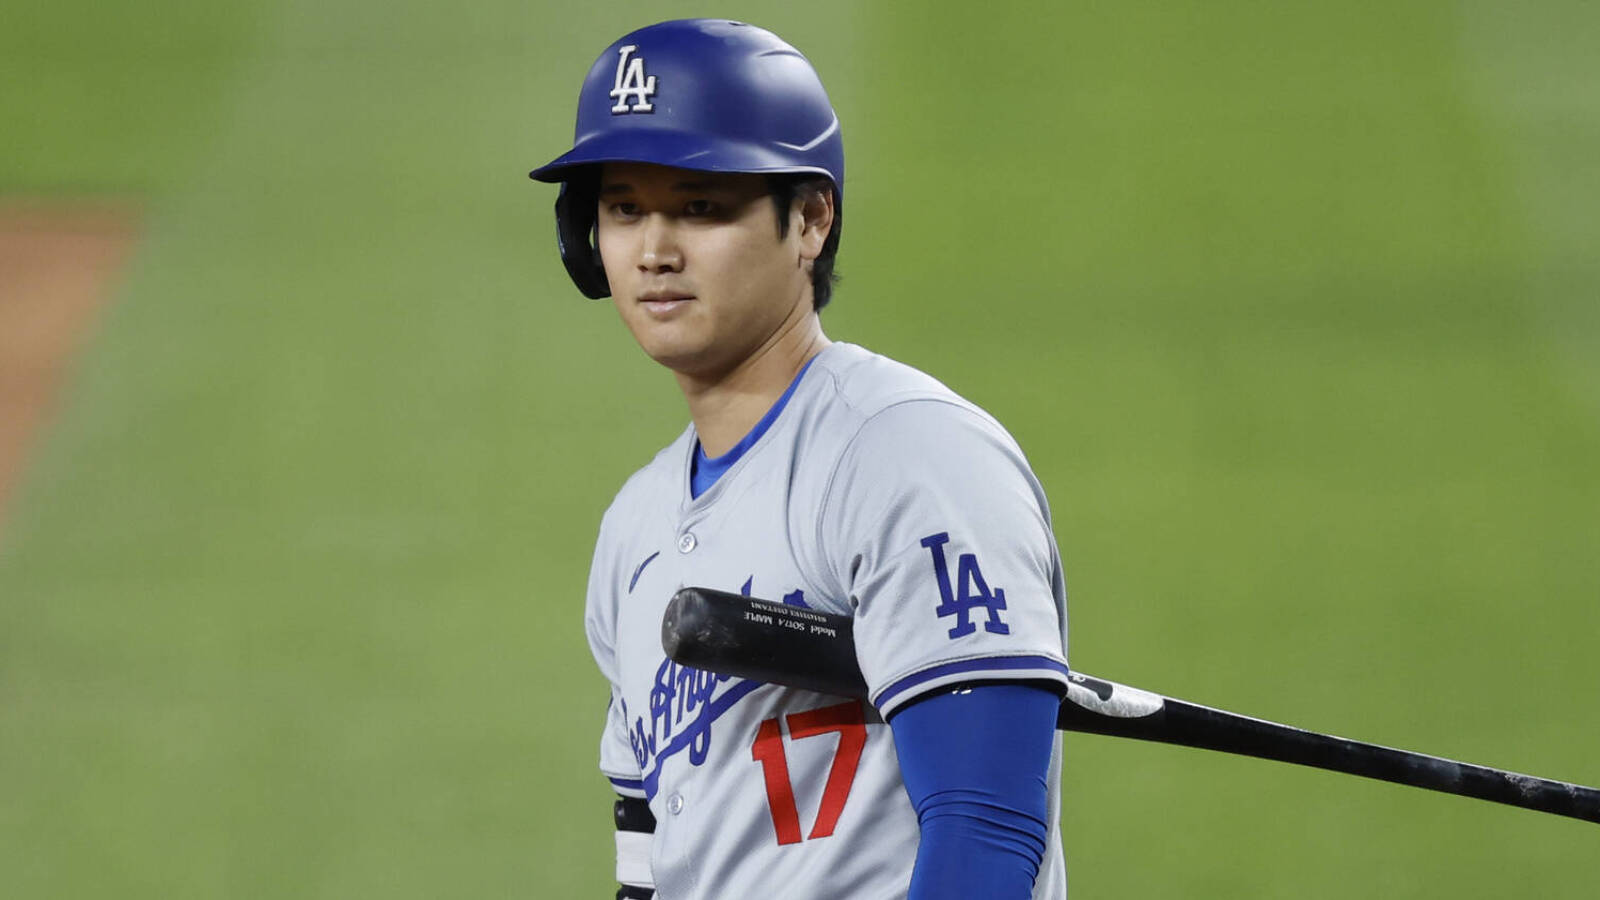 Shohei Ohtani has been everything the Dodgers could've hoped for and more